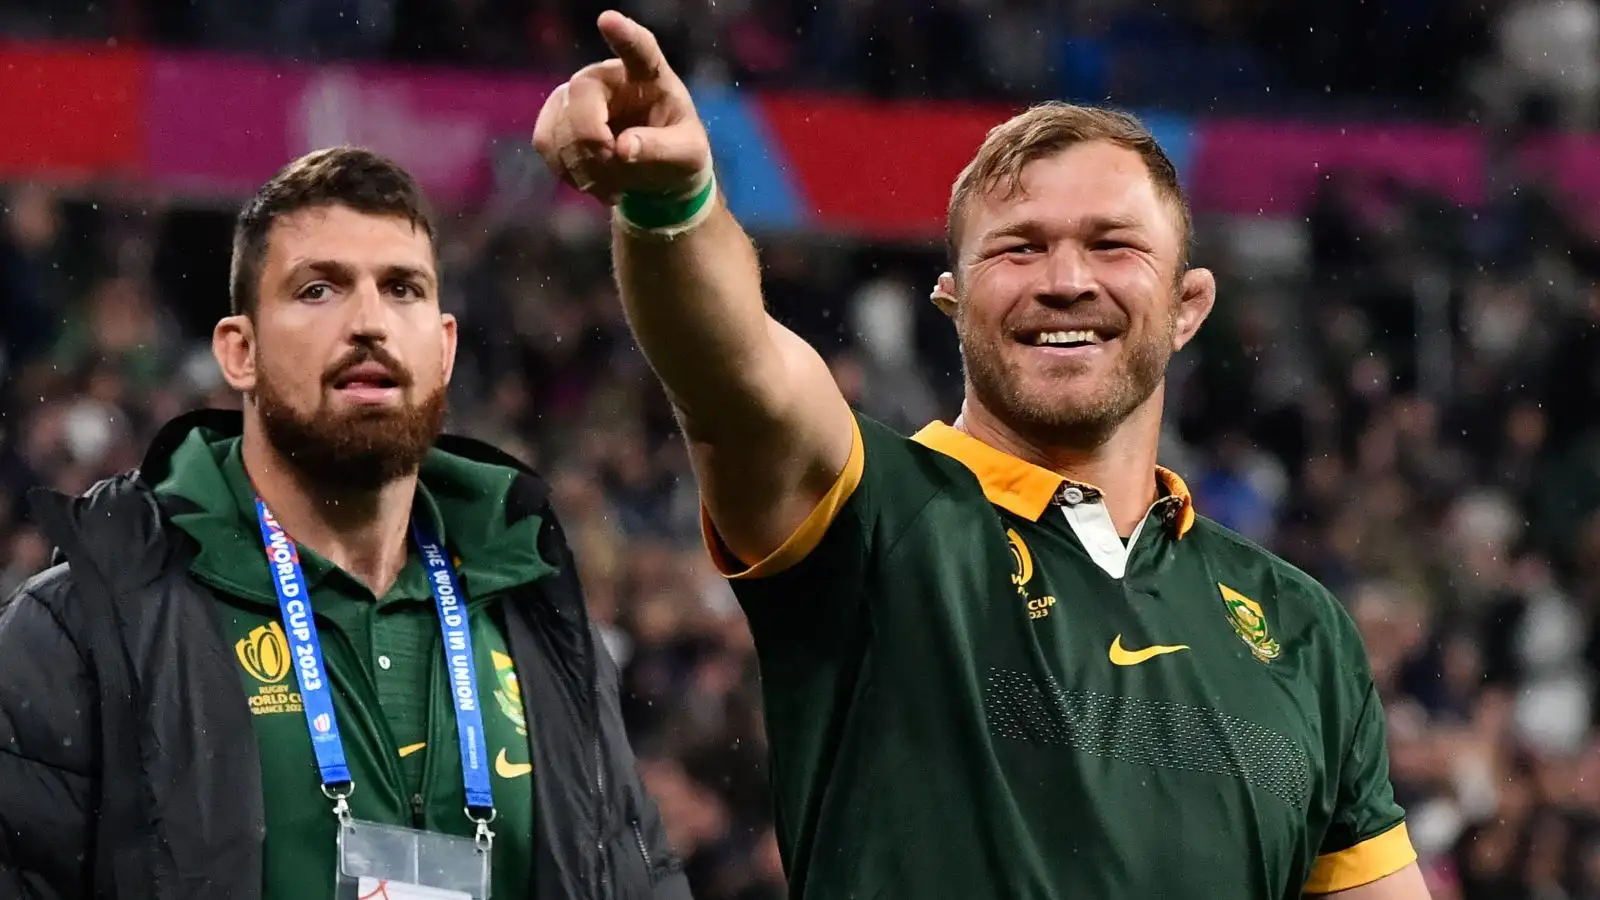 Springboks forward Duane Vermeulen during the Rugby World Cup